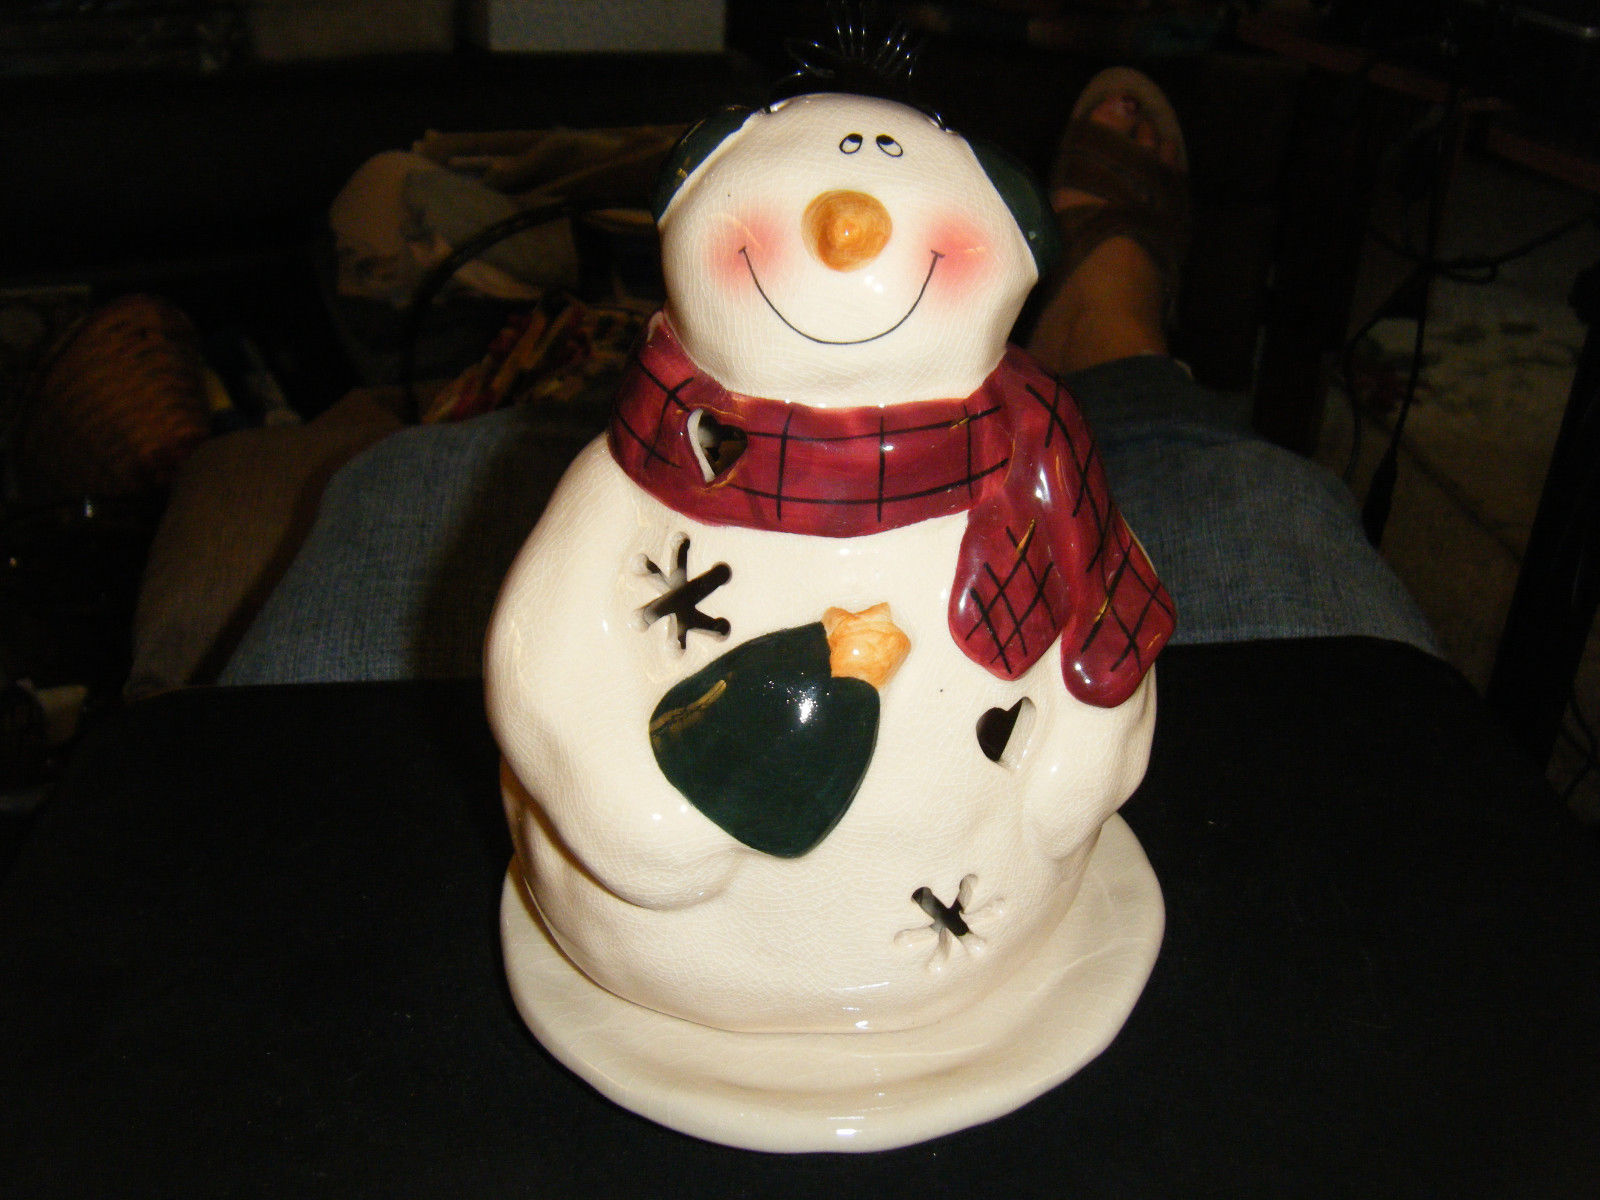 Adorable 2-Piece Chubby Snowman Votive or Tealight Candle Holder - $23.82